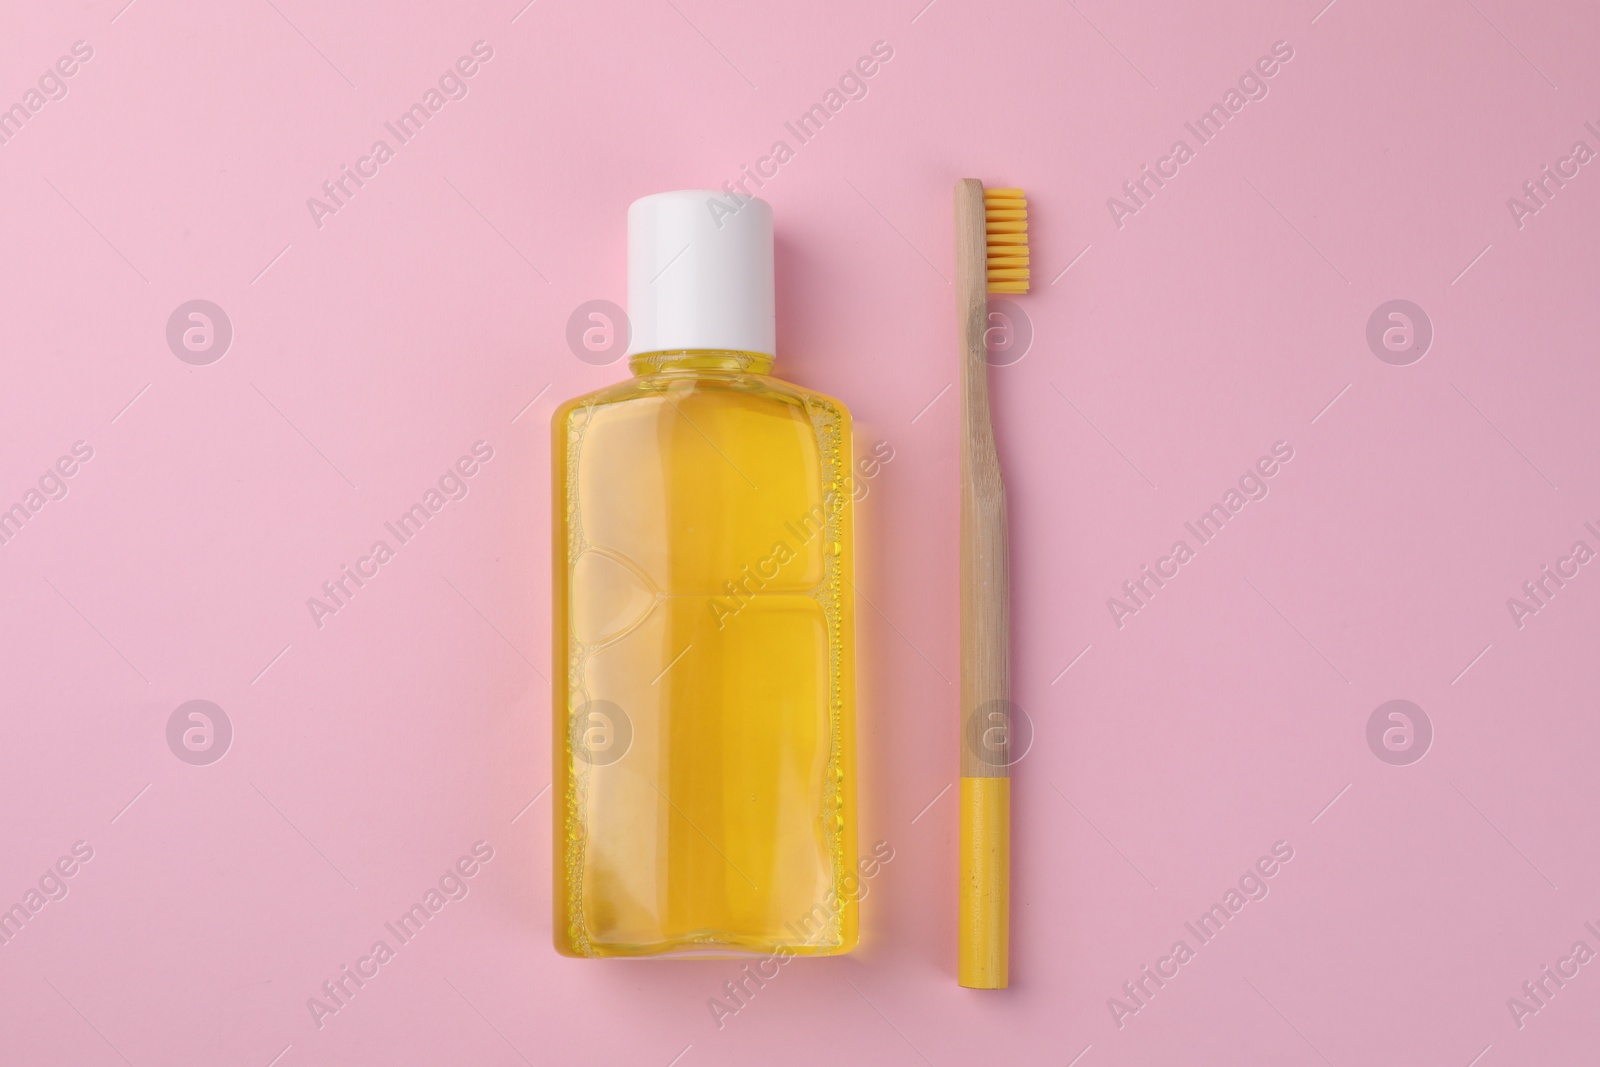 Photo of Fresh mouthwash in bottle and toothbrush on pink background, top view